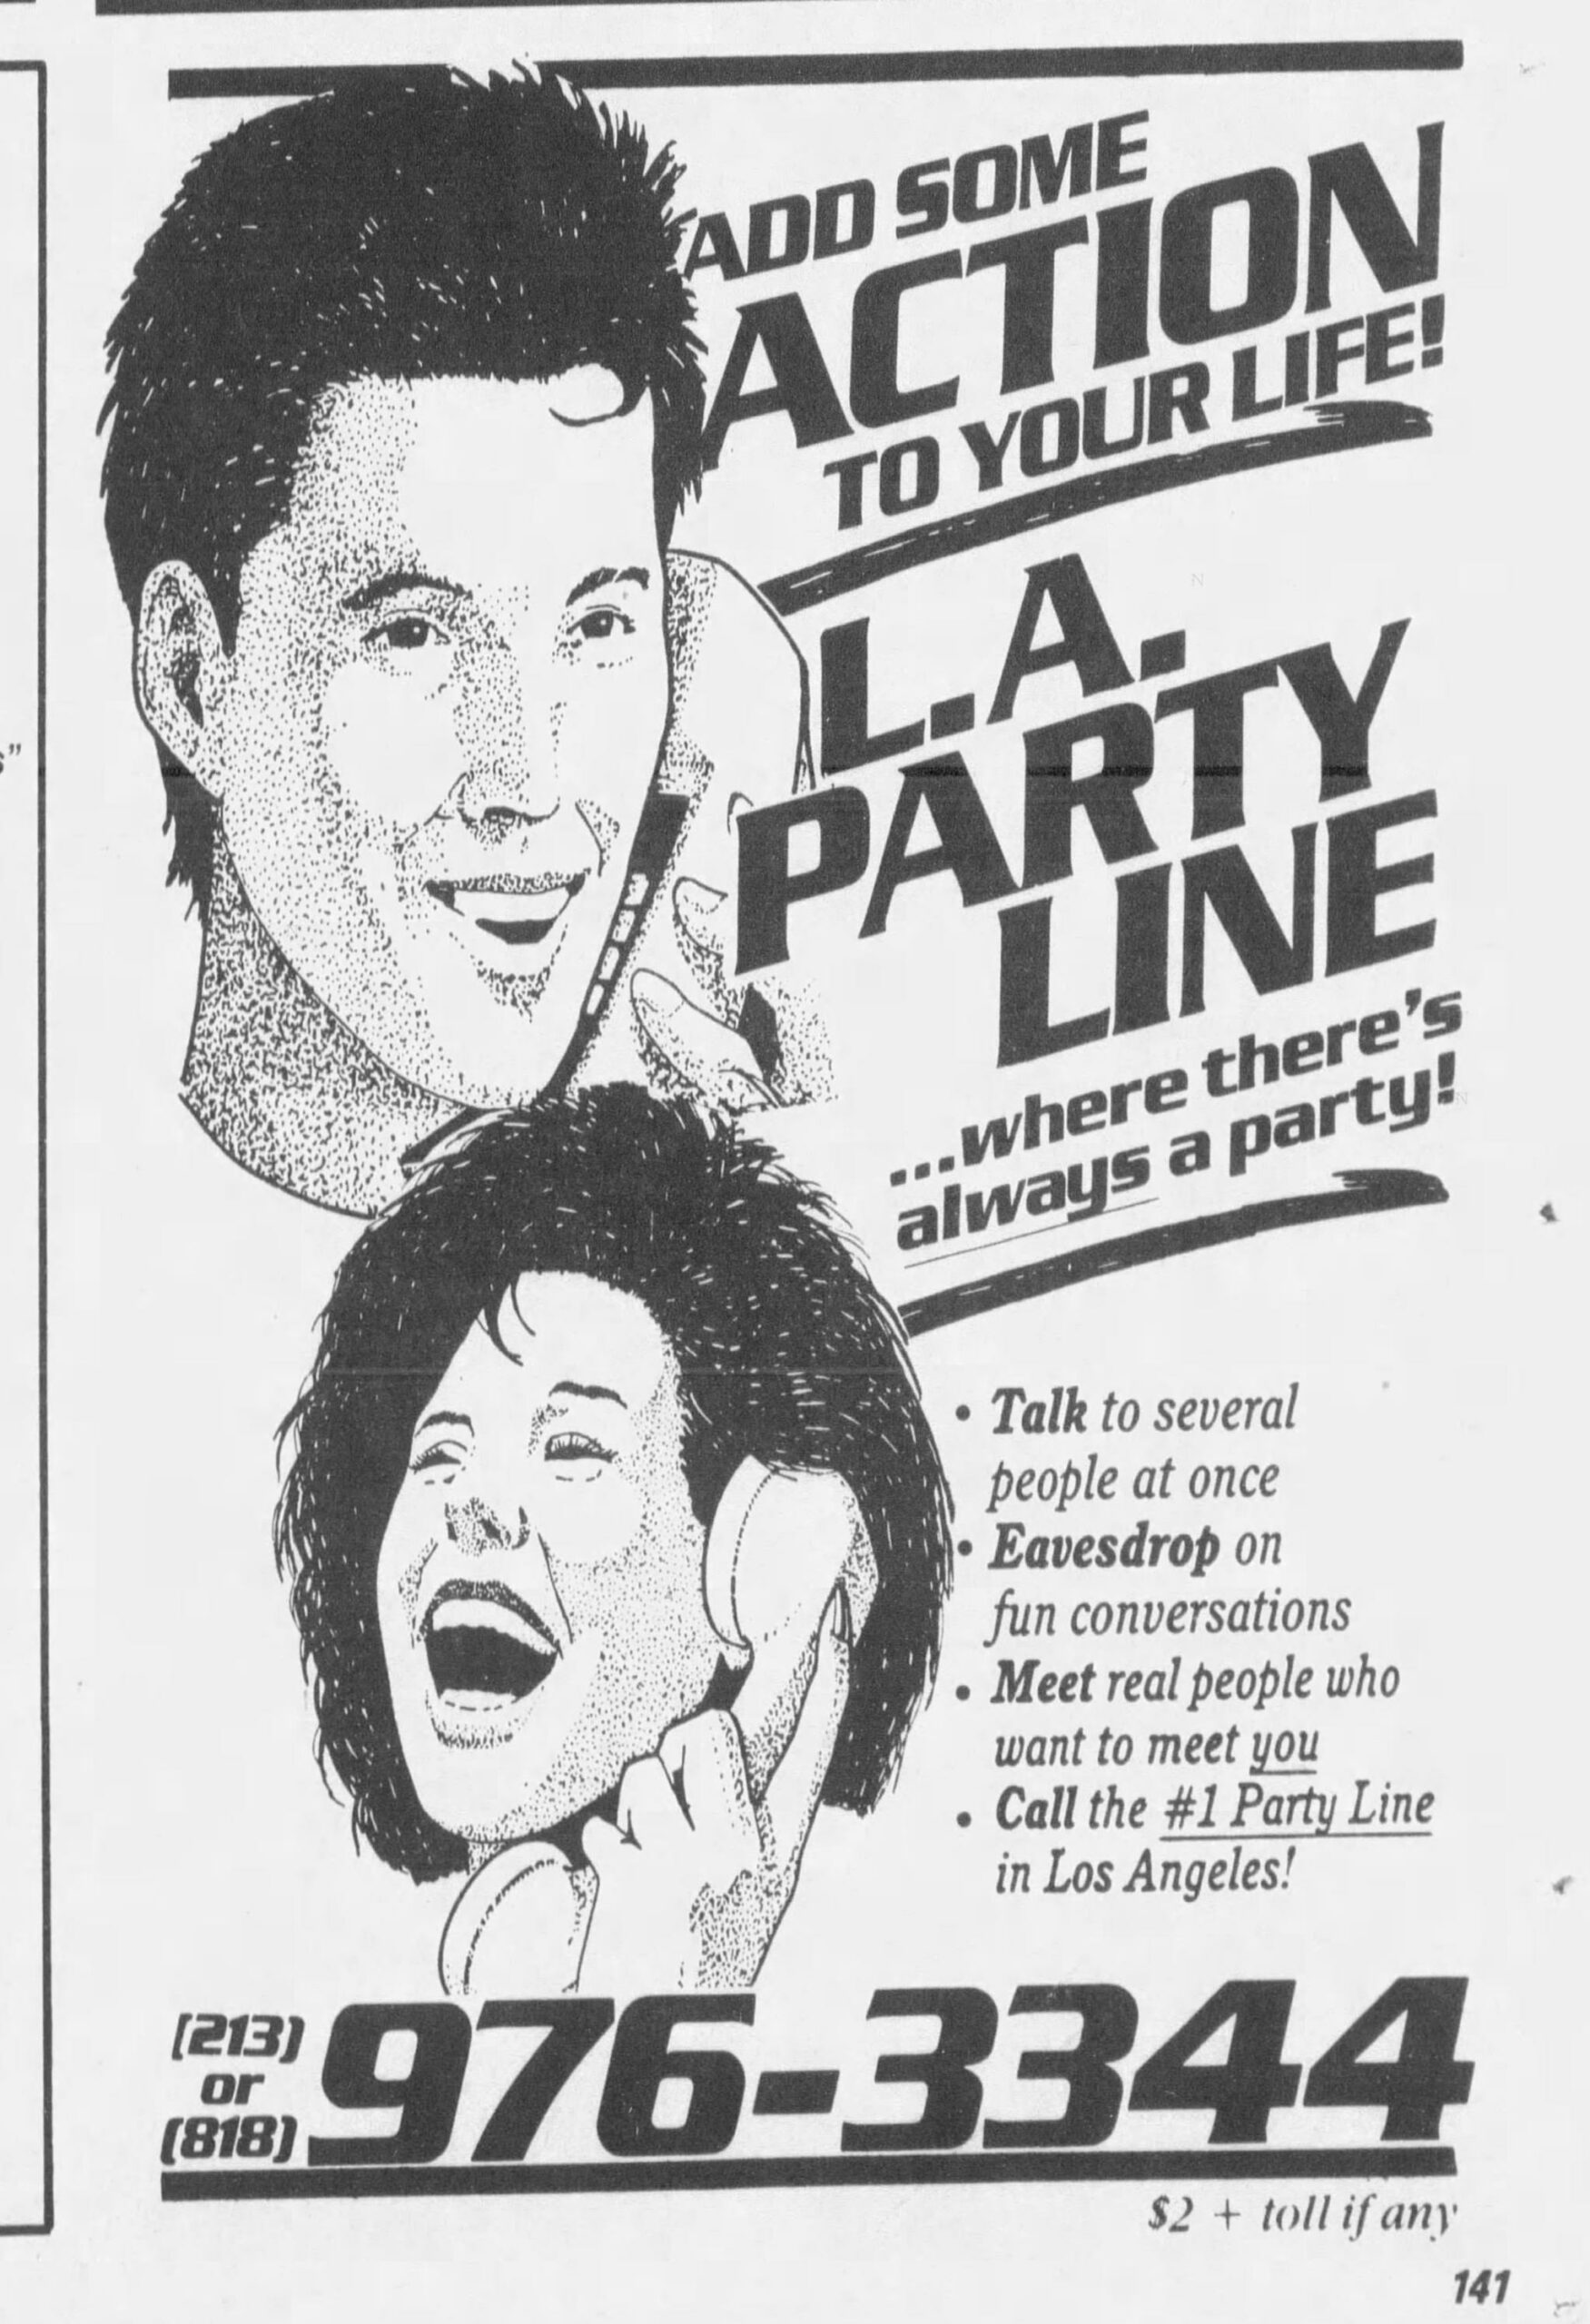 Add some action to your life! LA Party Line... where there's always a party!